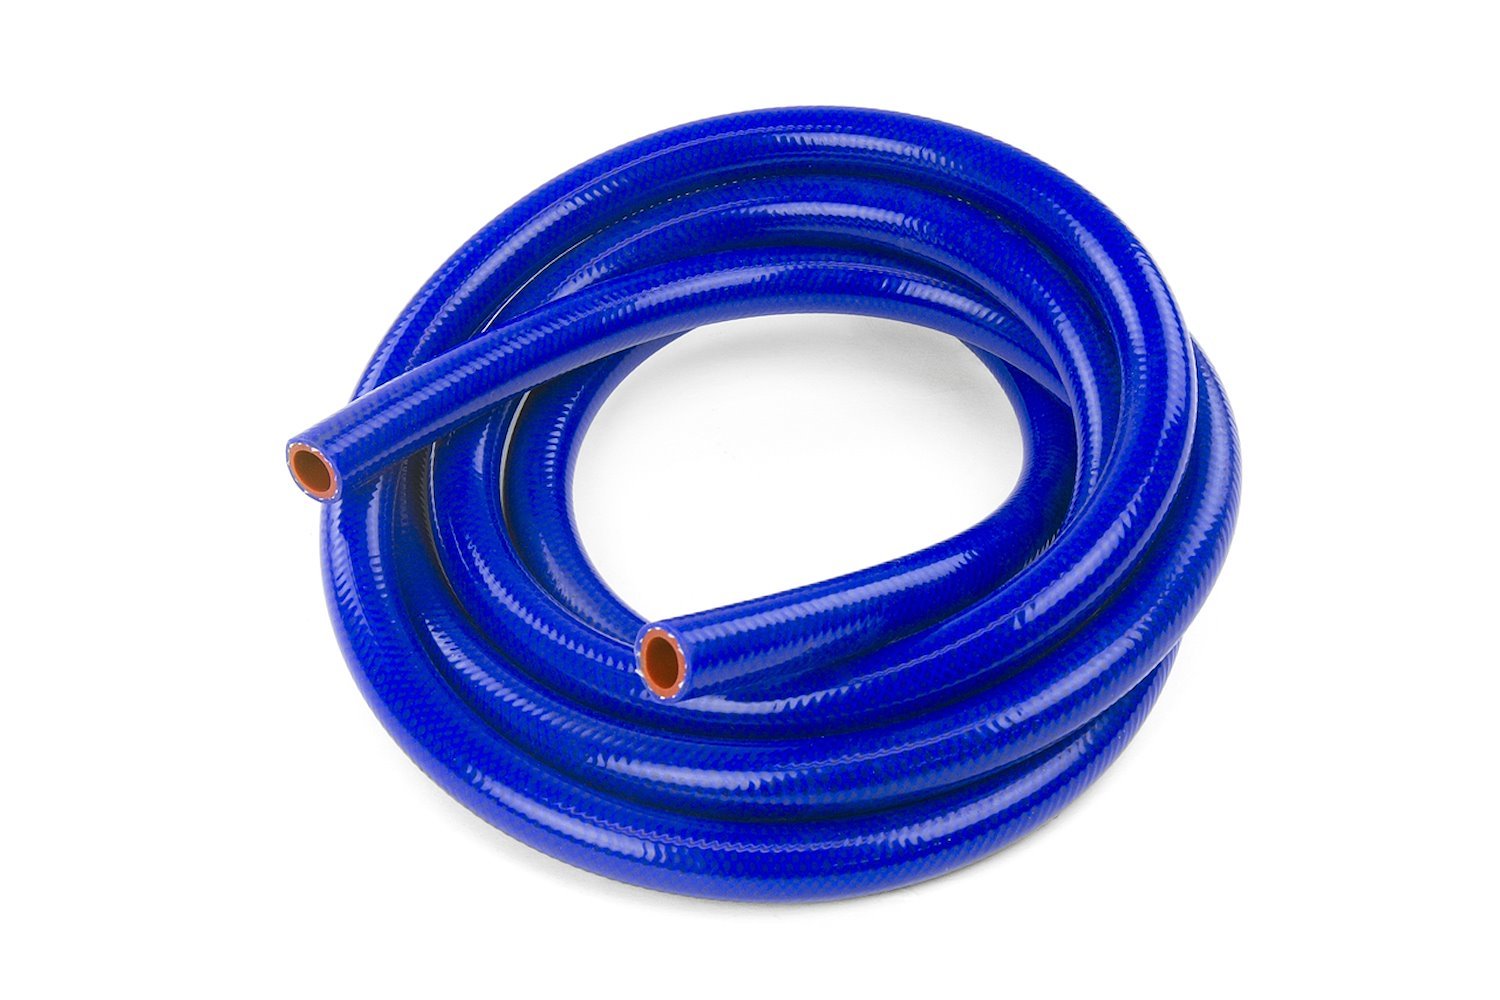 HTHH-032-BLUEx10 Silicone Heater Hose Tubing, High-Temp Reinforced, 5/16 in. ID, 10 ft. Roll, Blue